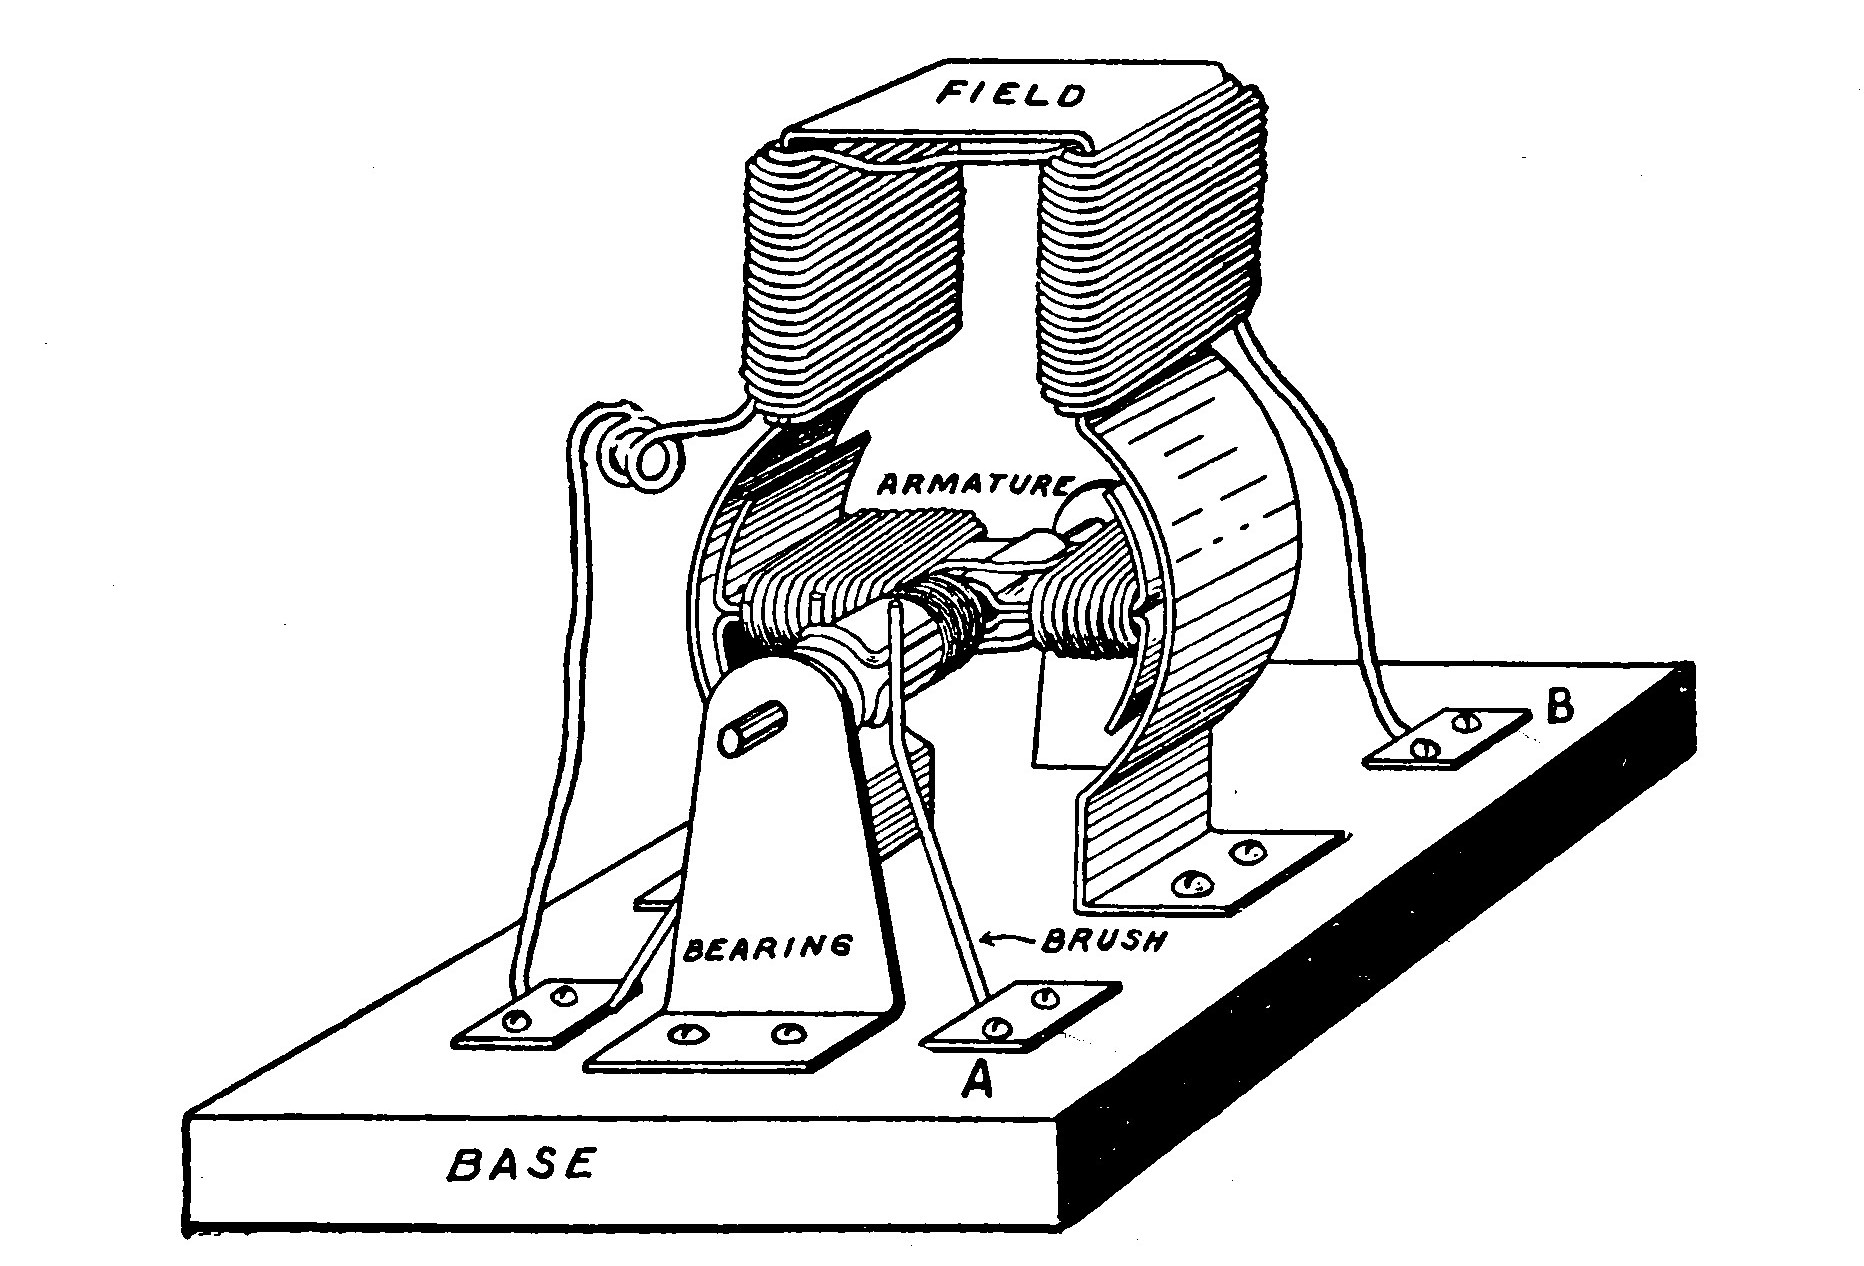 FIG. 19.—The completed Motor.